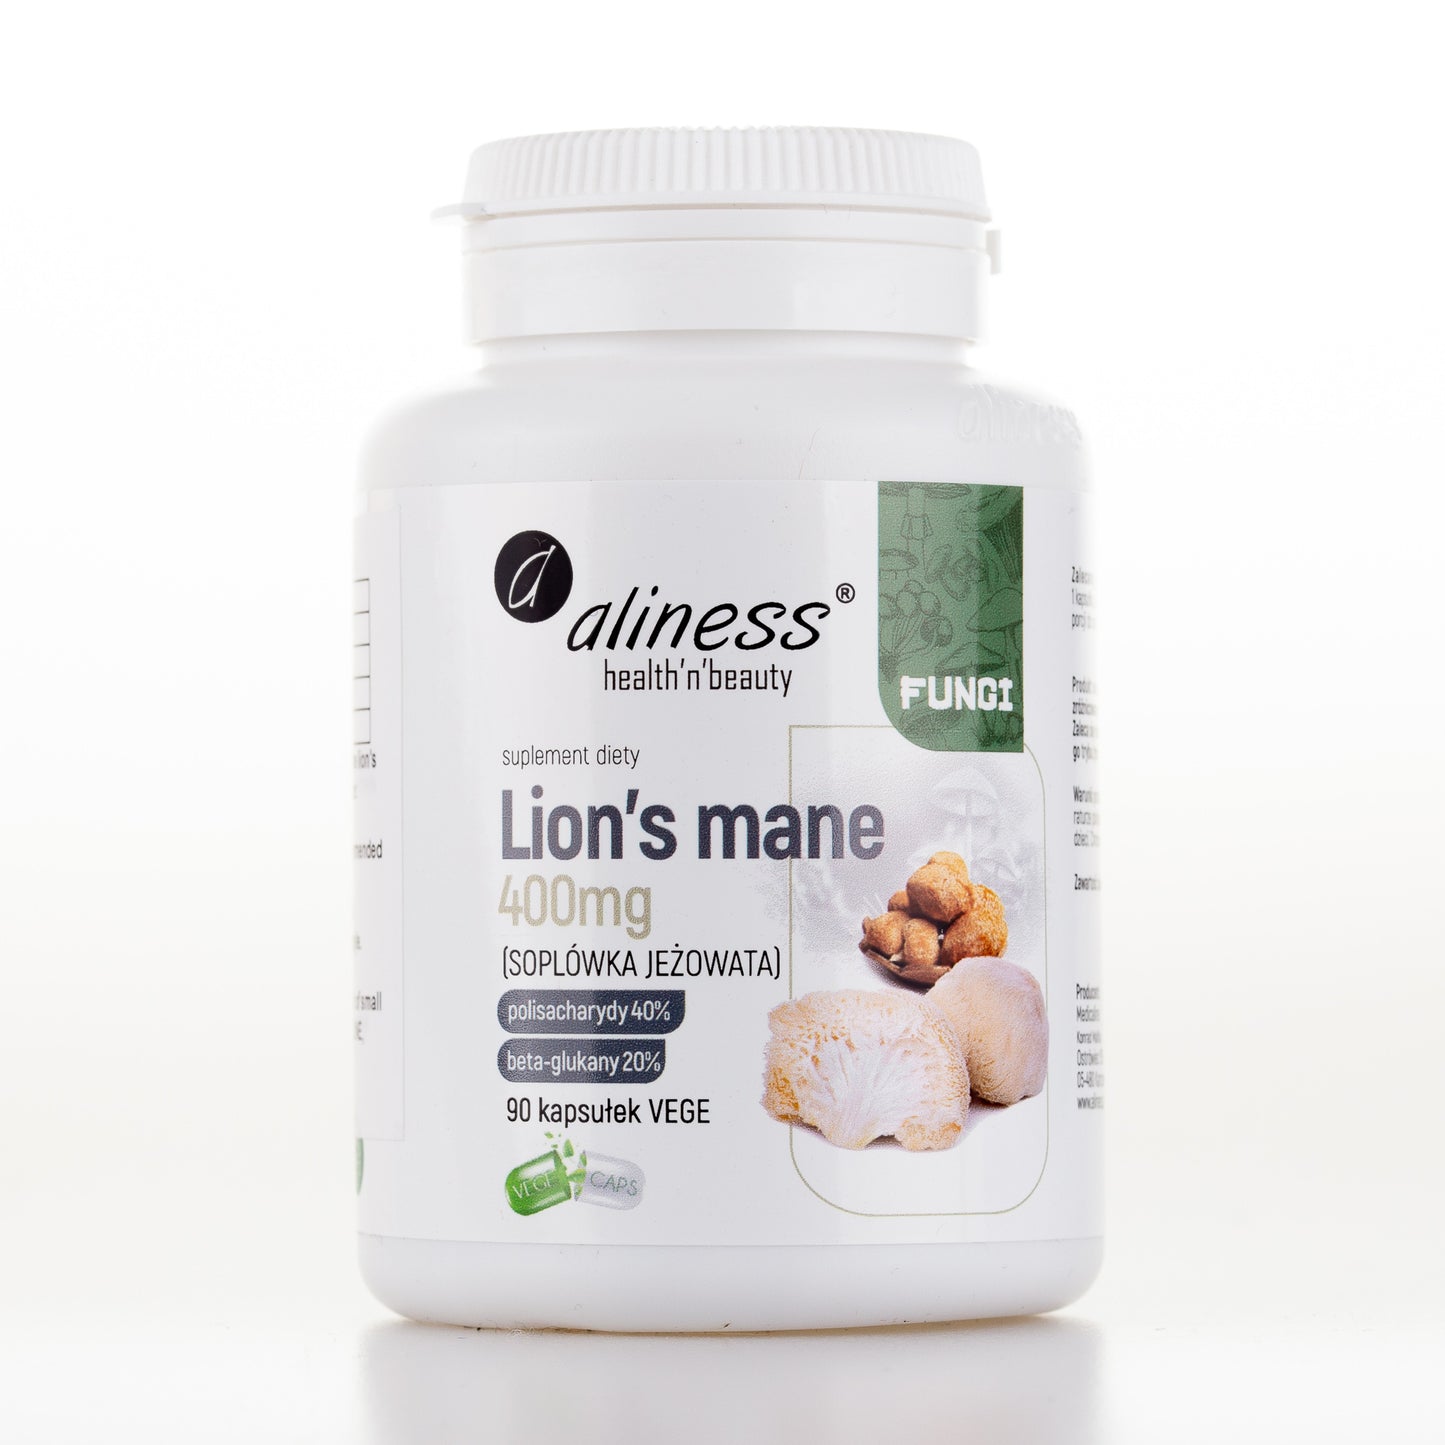 3 Months Supply of Lion's Mane Mushroom Supplement Capsules UK, 400mg, 90 capsules of powder extract